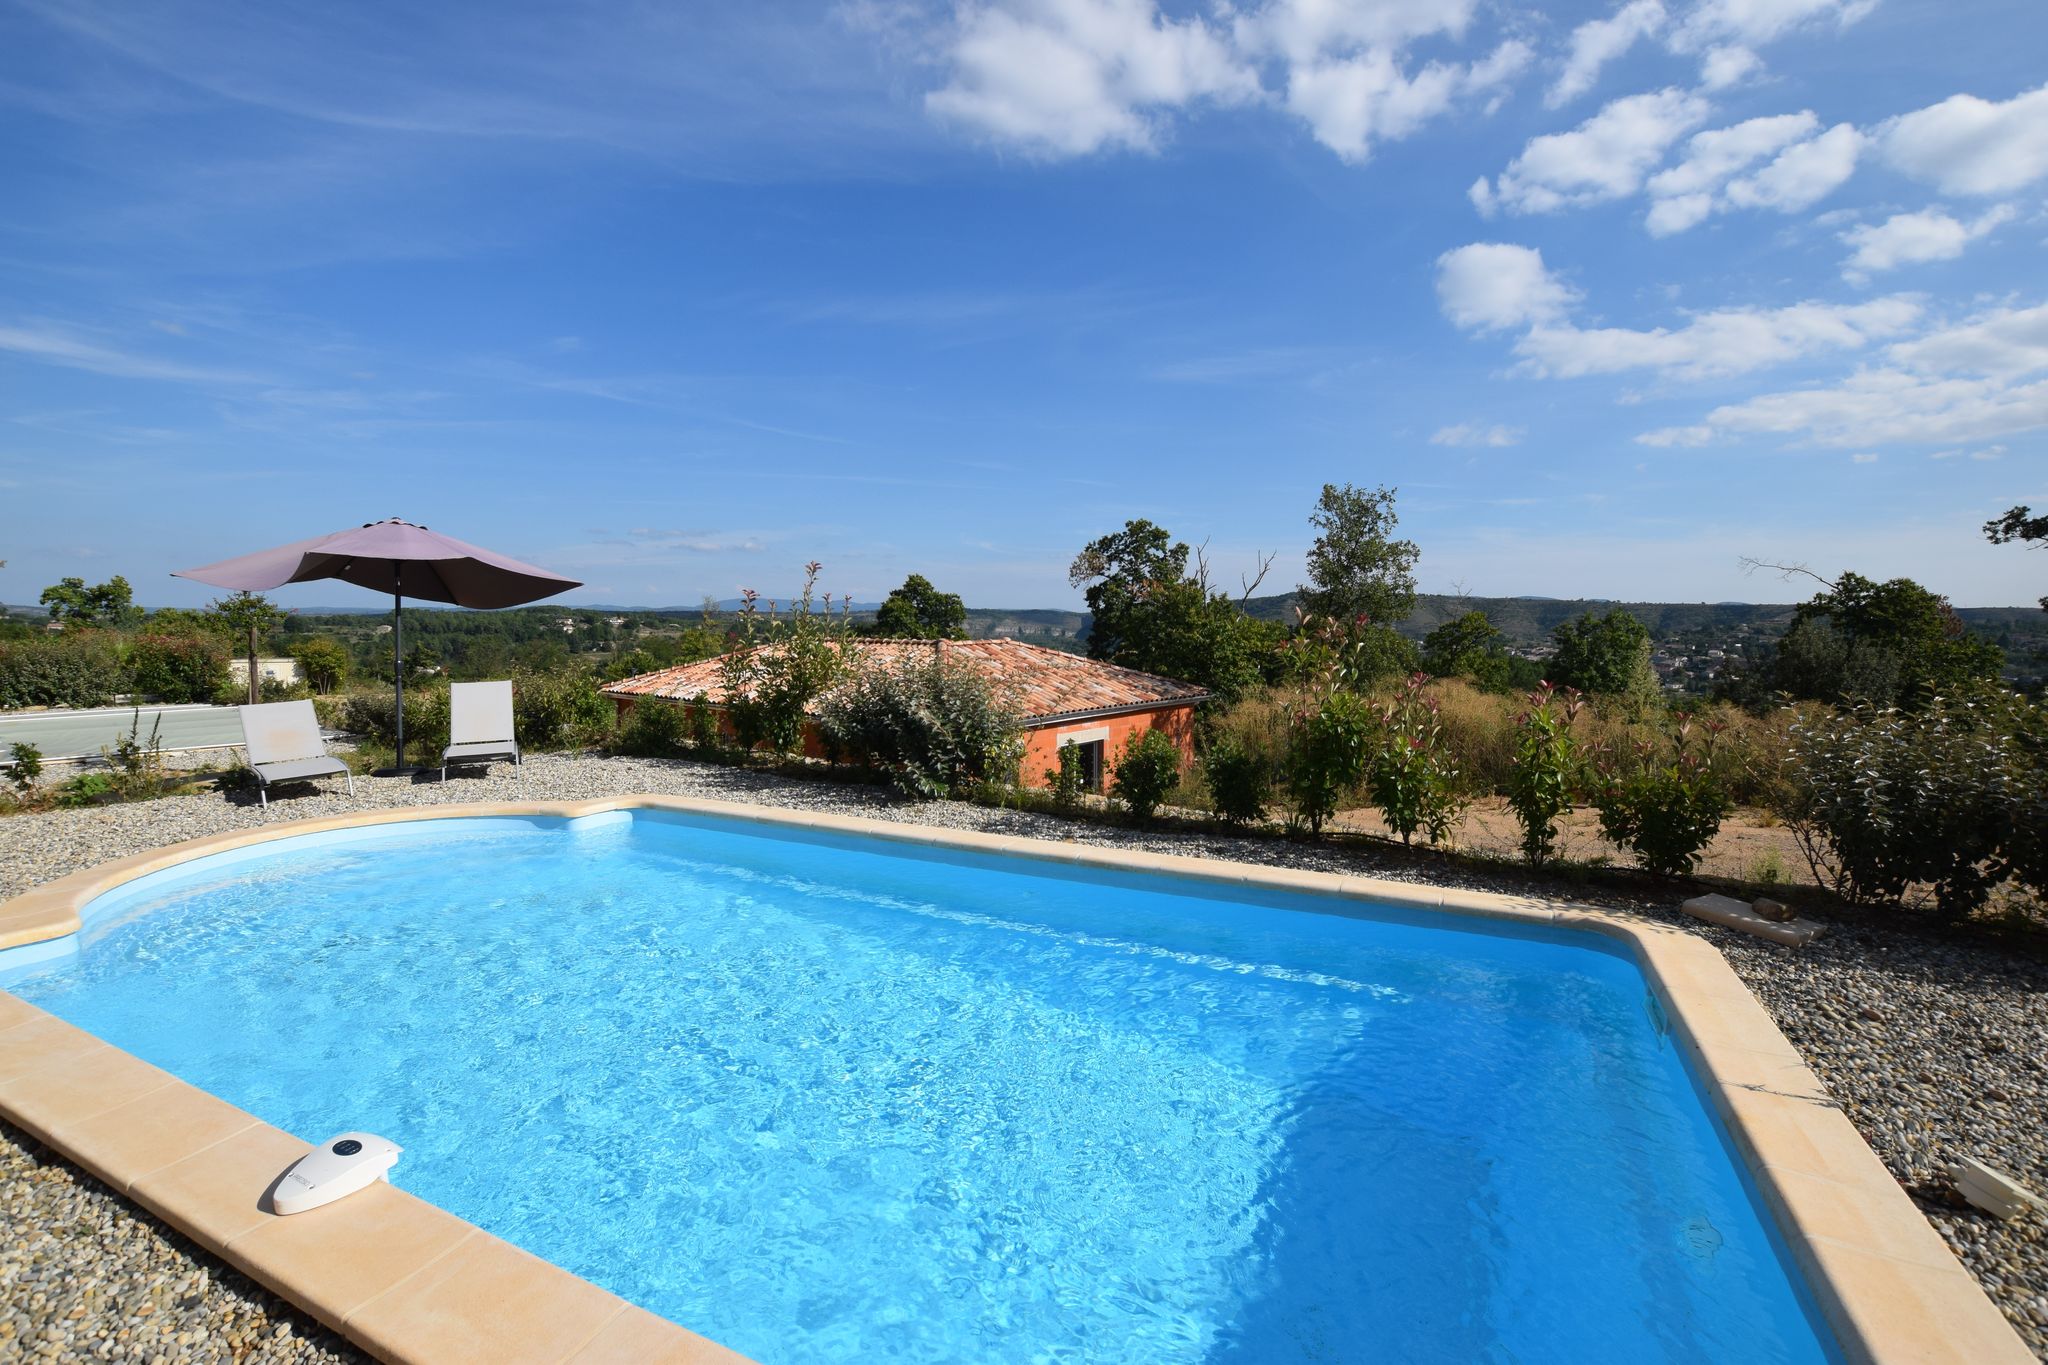 Charming Villa at Joyeuse France with Private Swimming Pool